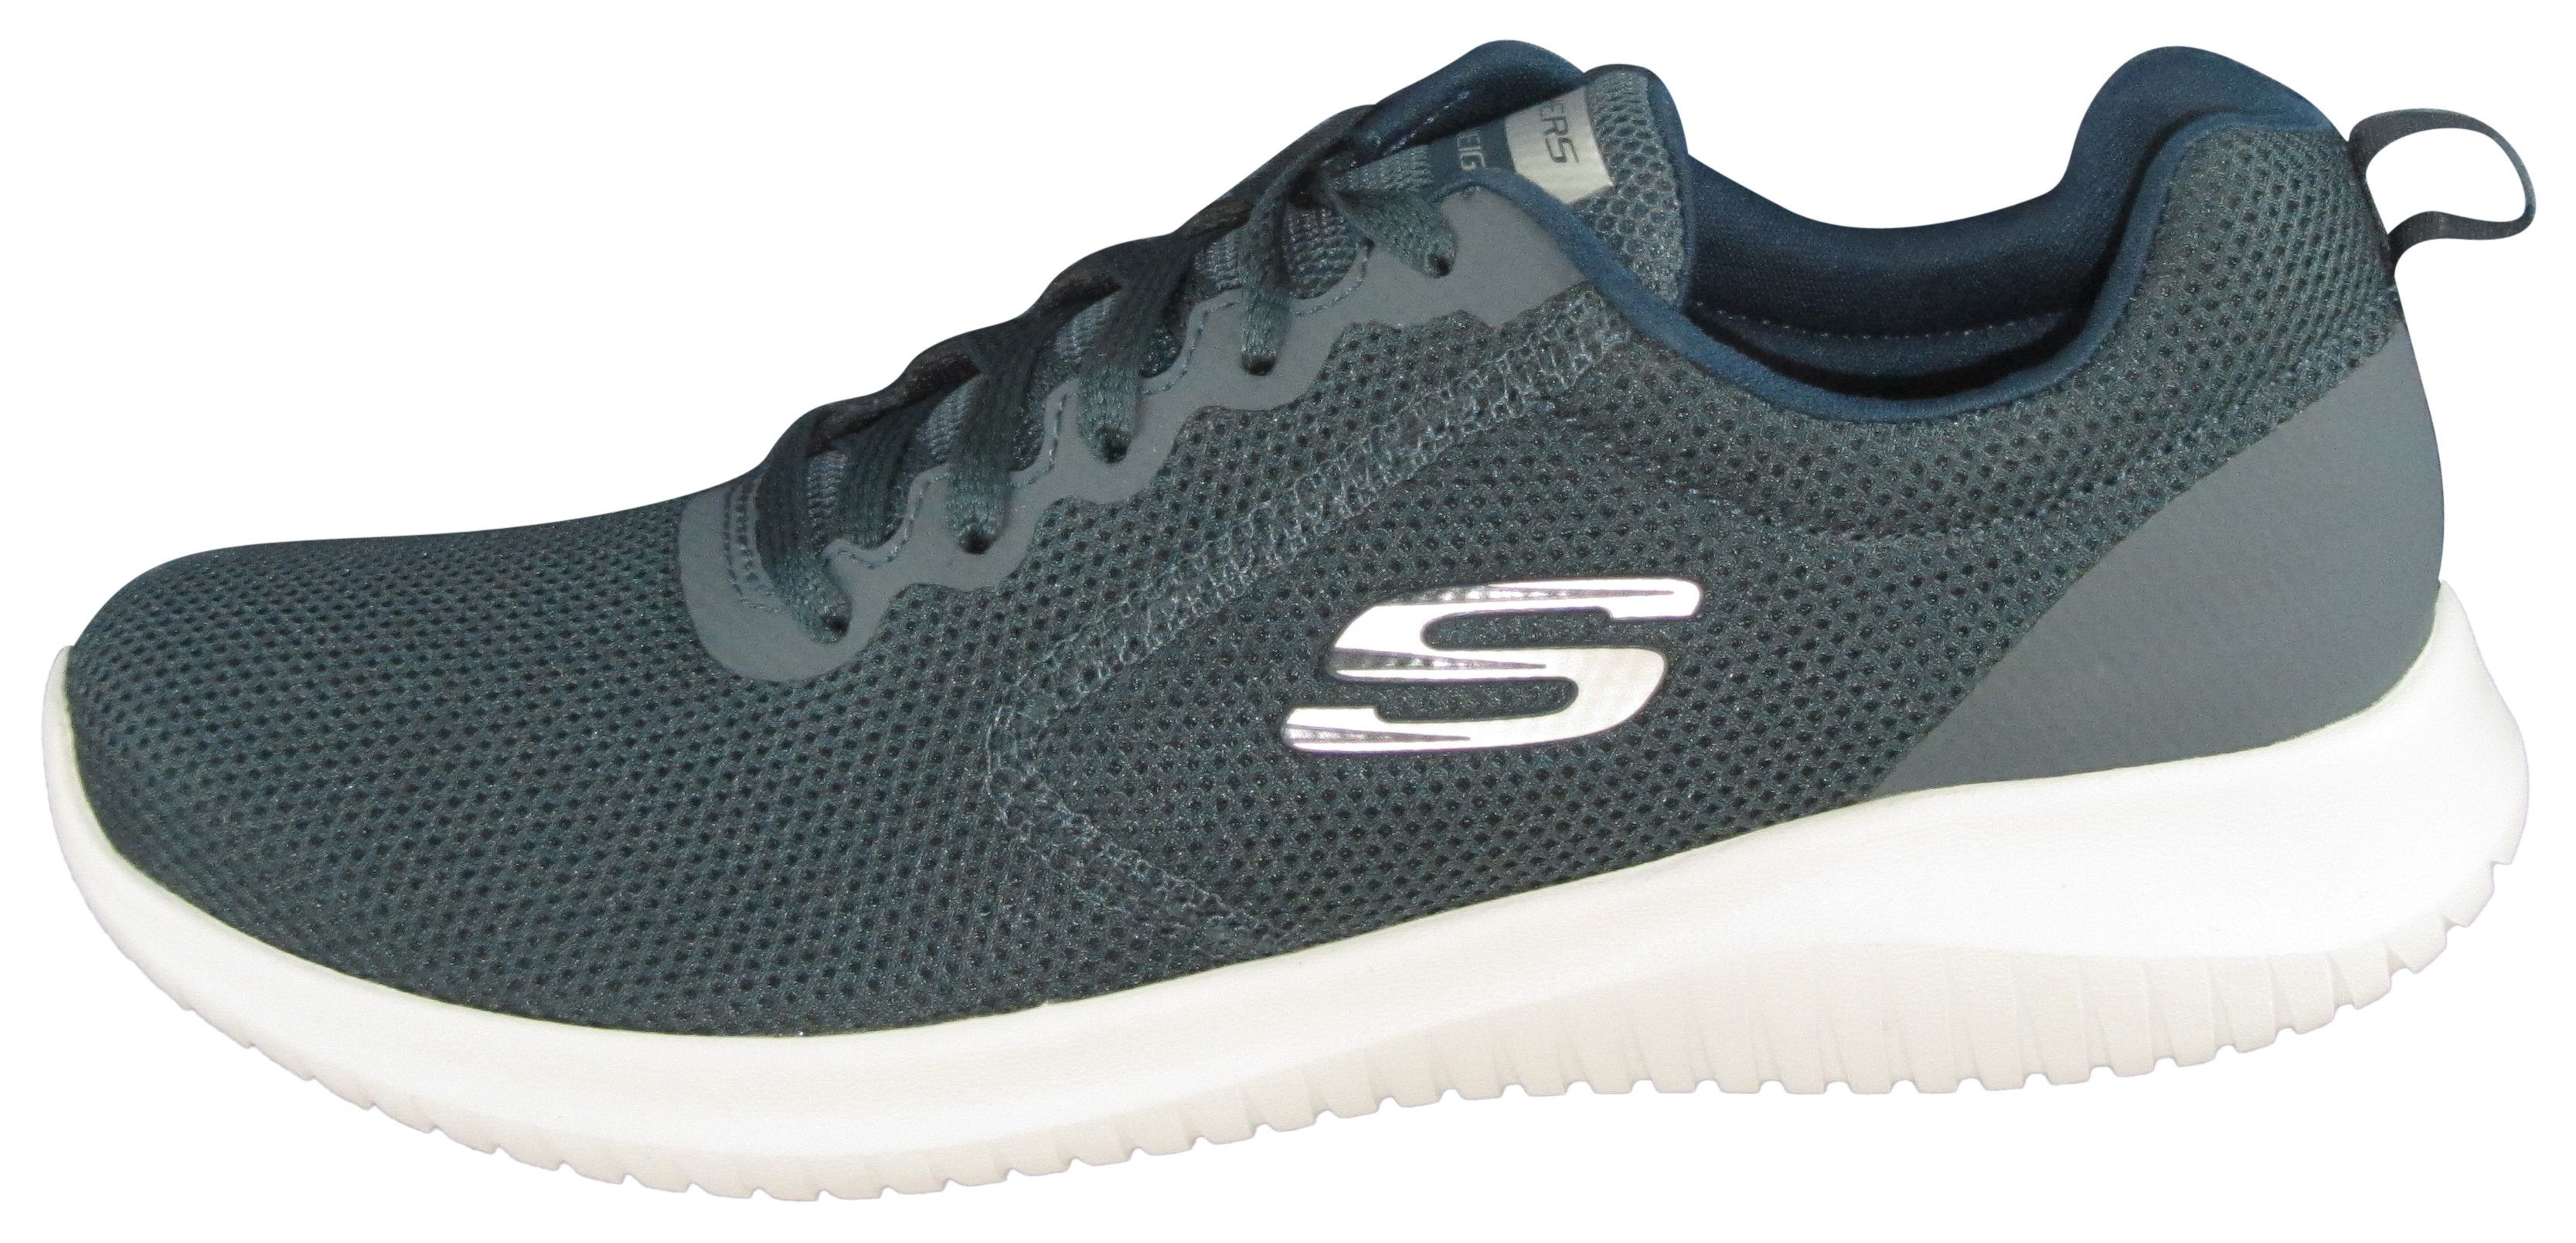 12846 - ULTRA FLEX FREE SPIRIT SKECHERS - WOMENS SHOES-SHOES - low to ...